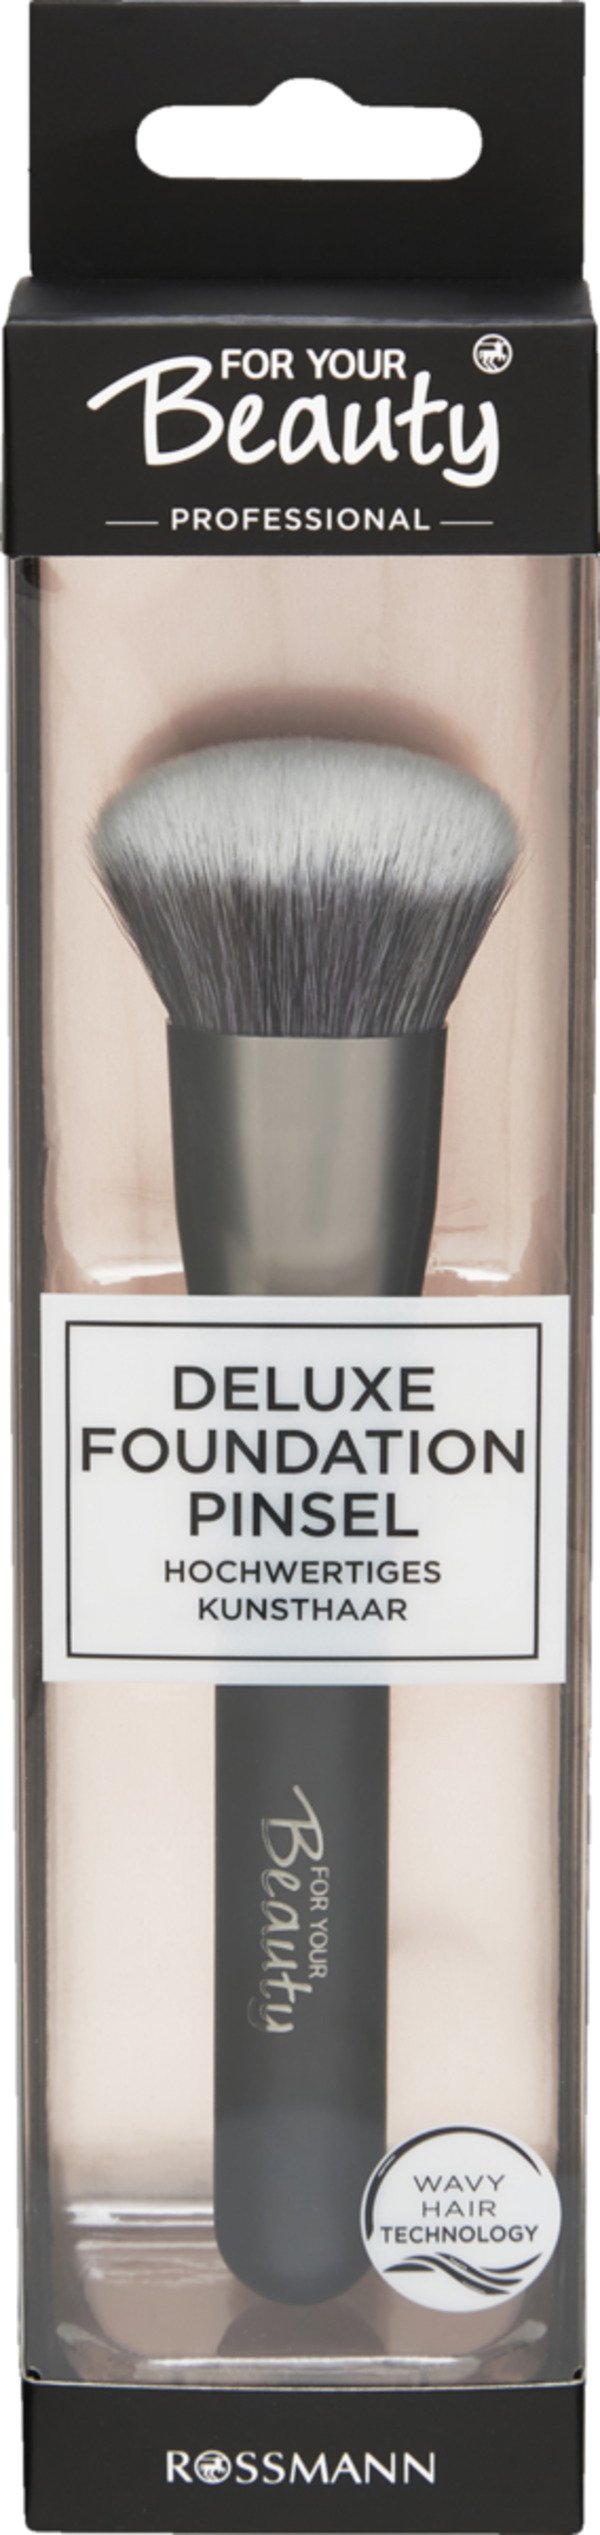 Bild 1 von FOR YOUR Beauty Professional Deluxe Foundation-Pinsel 015